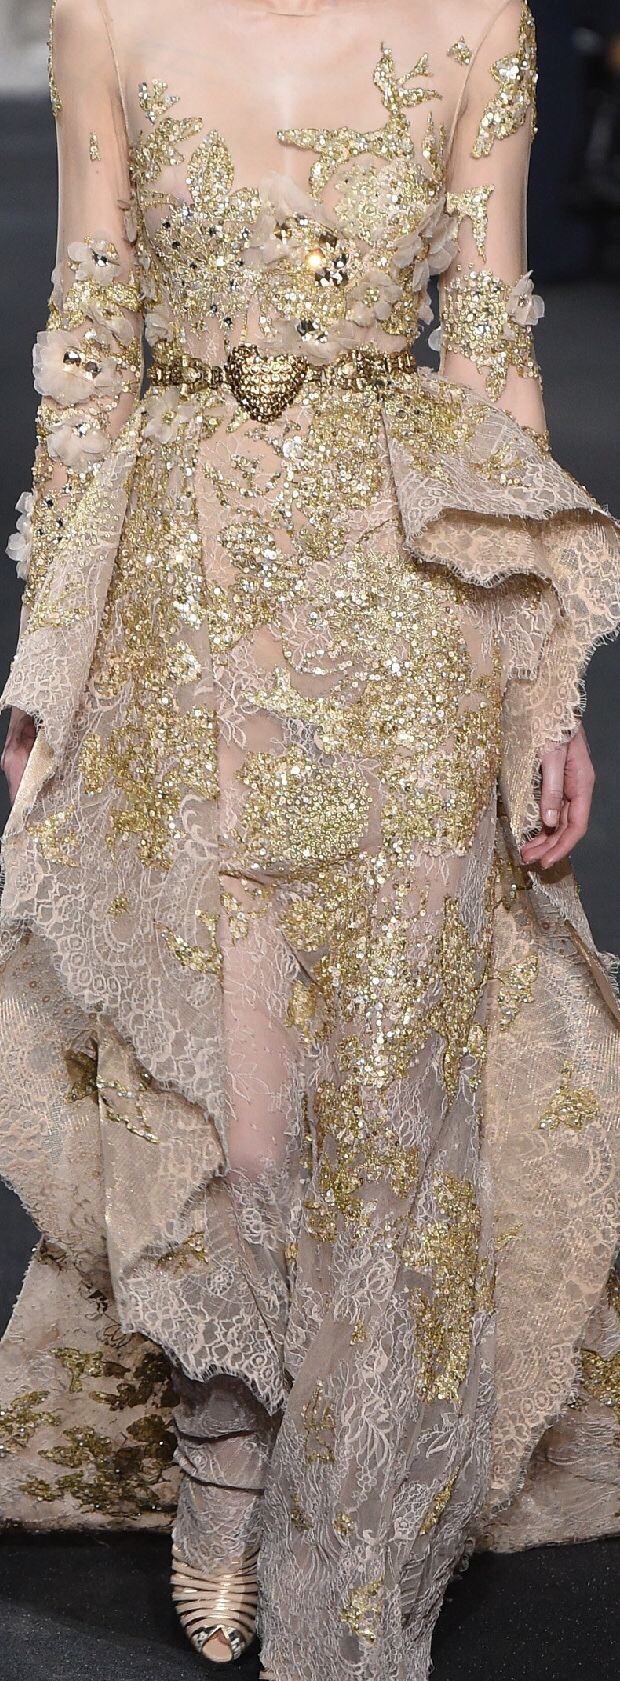 Ms-Mandy-M : Elie Saab Fall 2016 Haute Couture